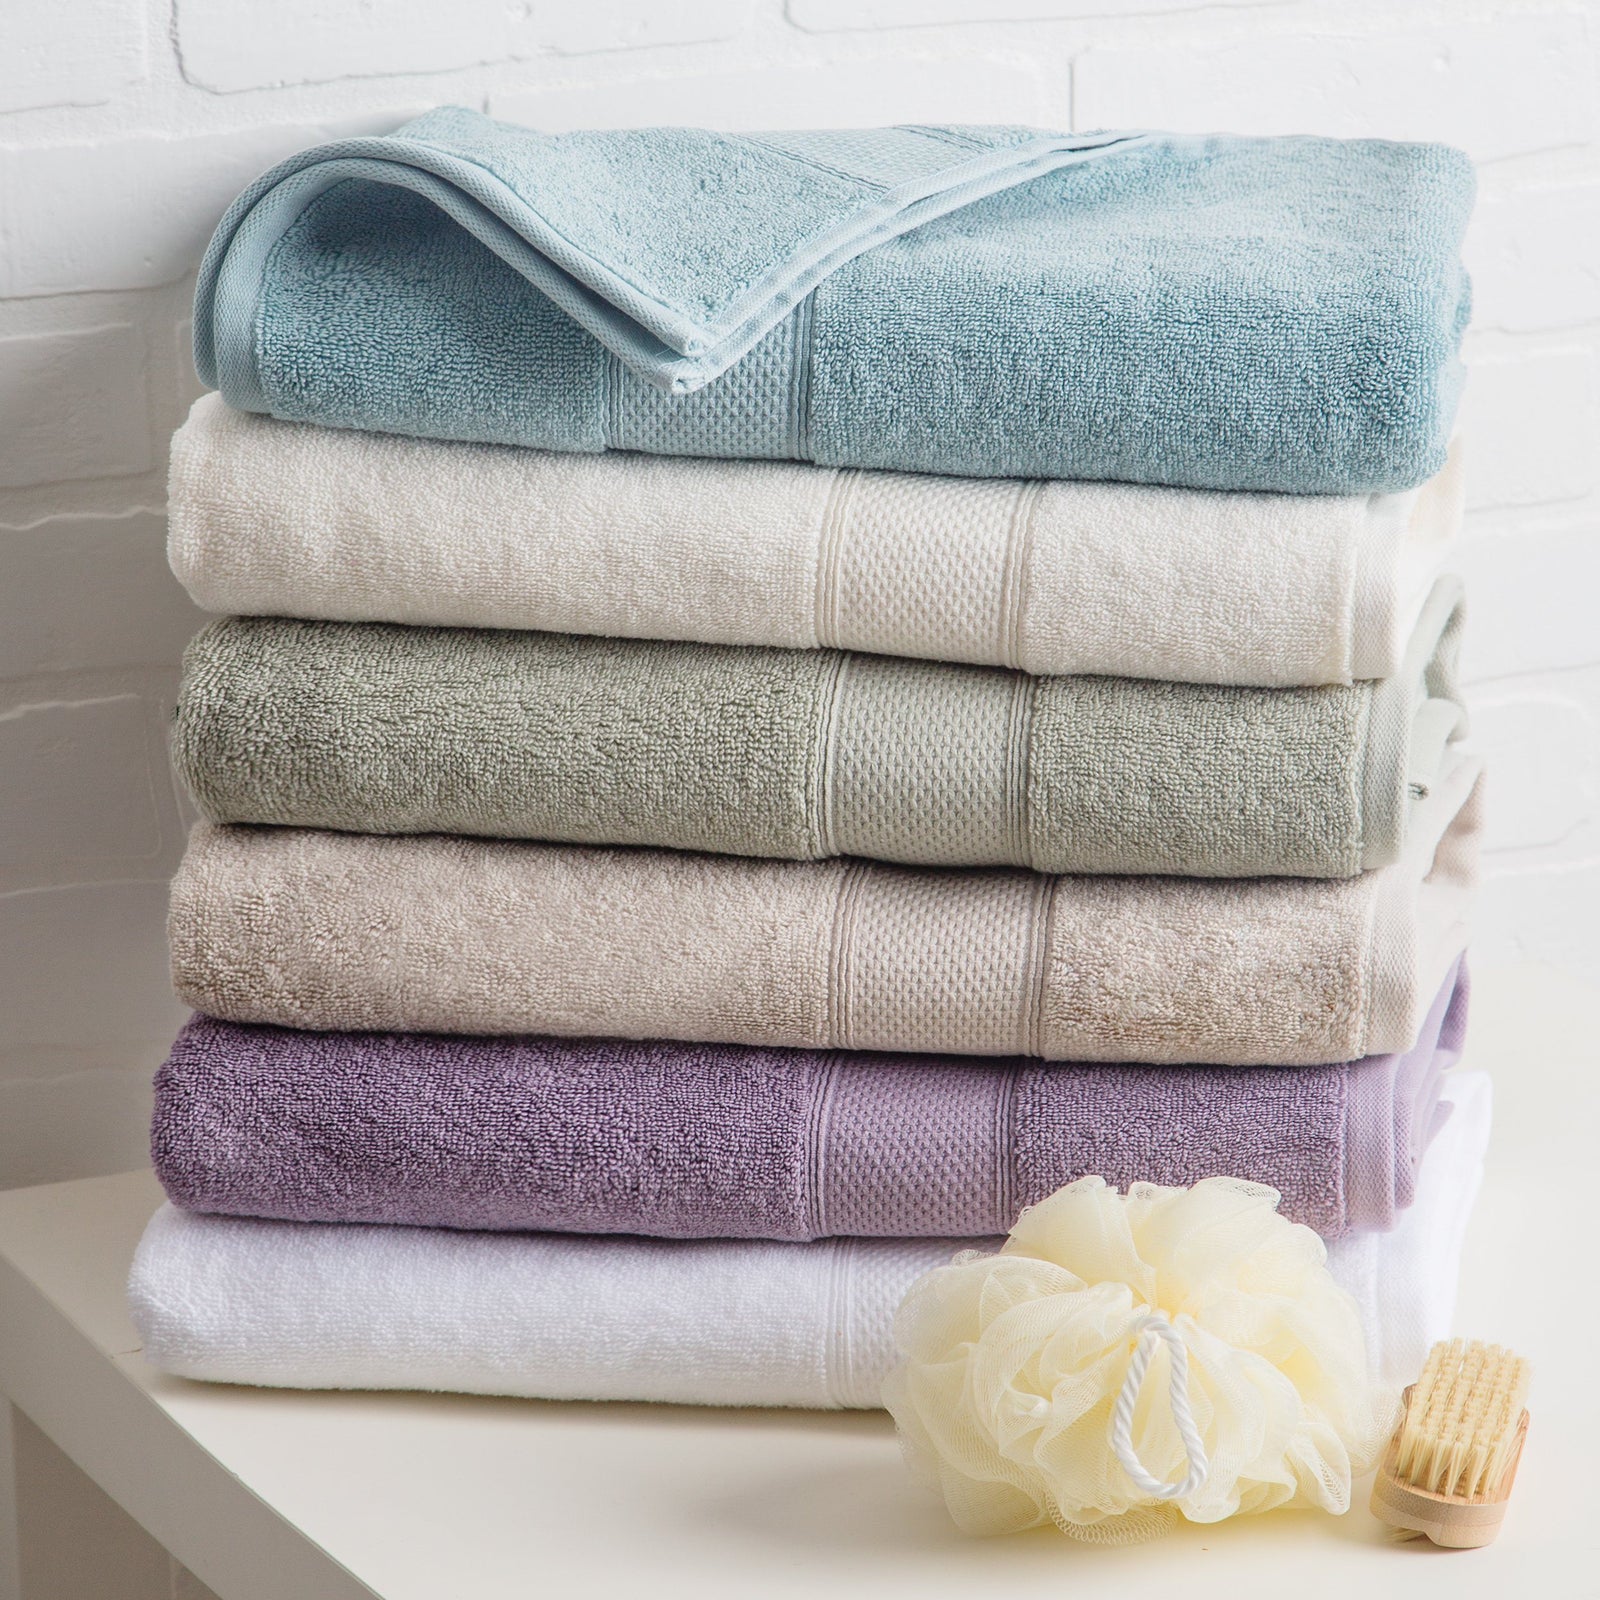 Bath Towels  Shop Luxury Bedding and Bath at Luxor Linens